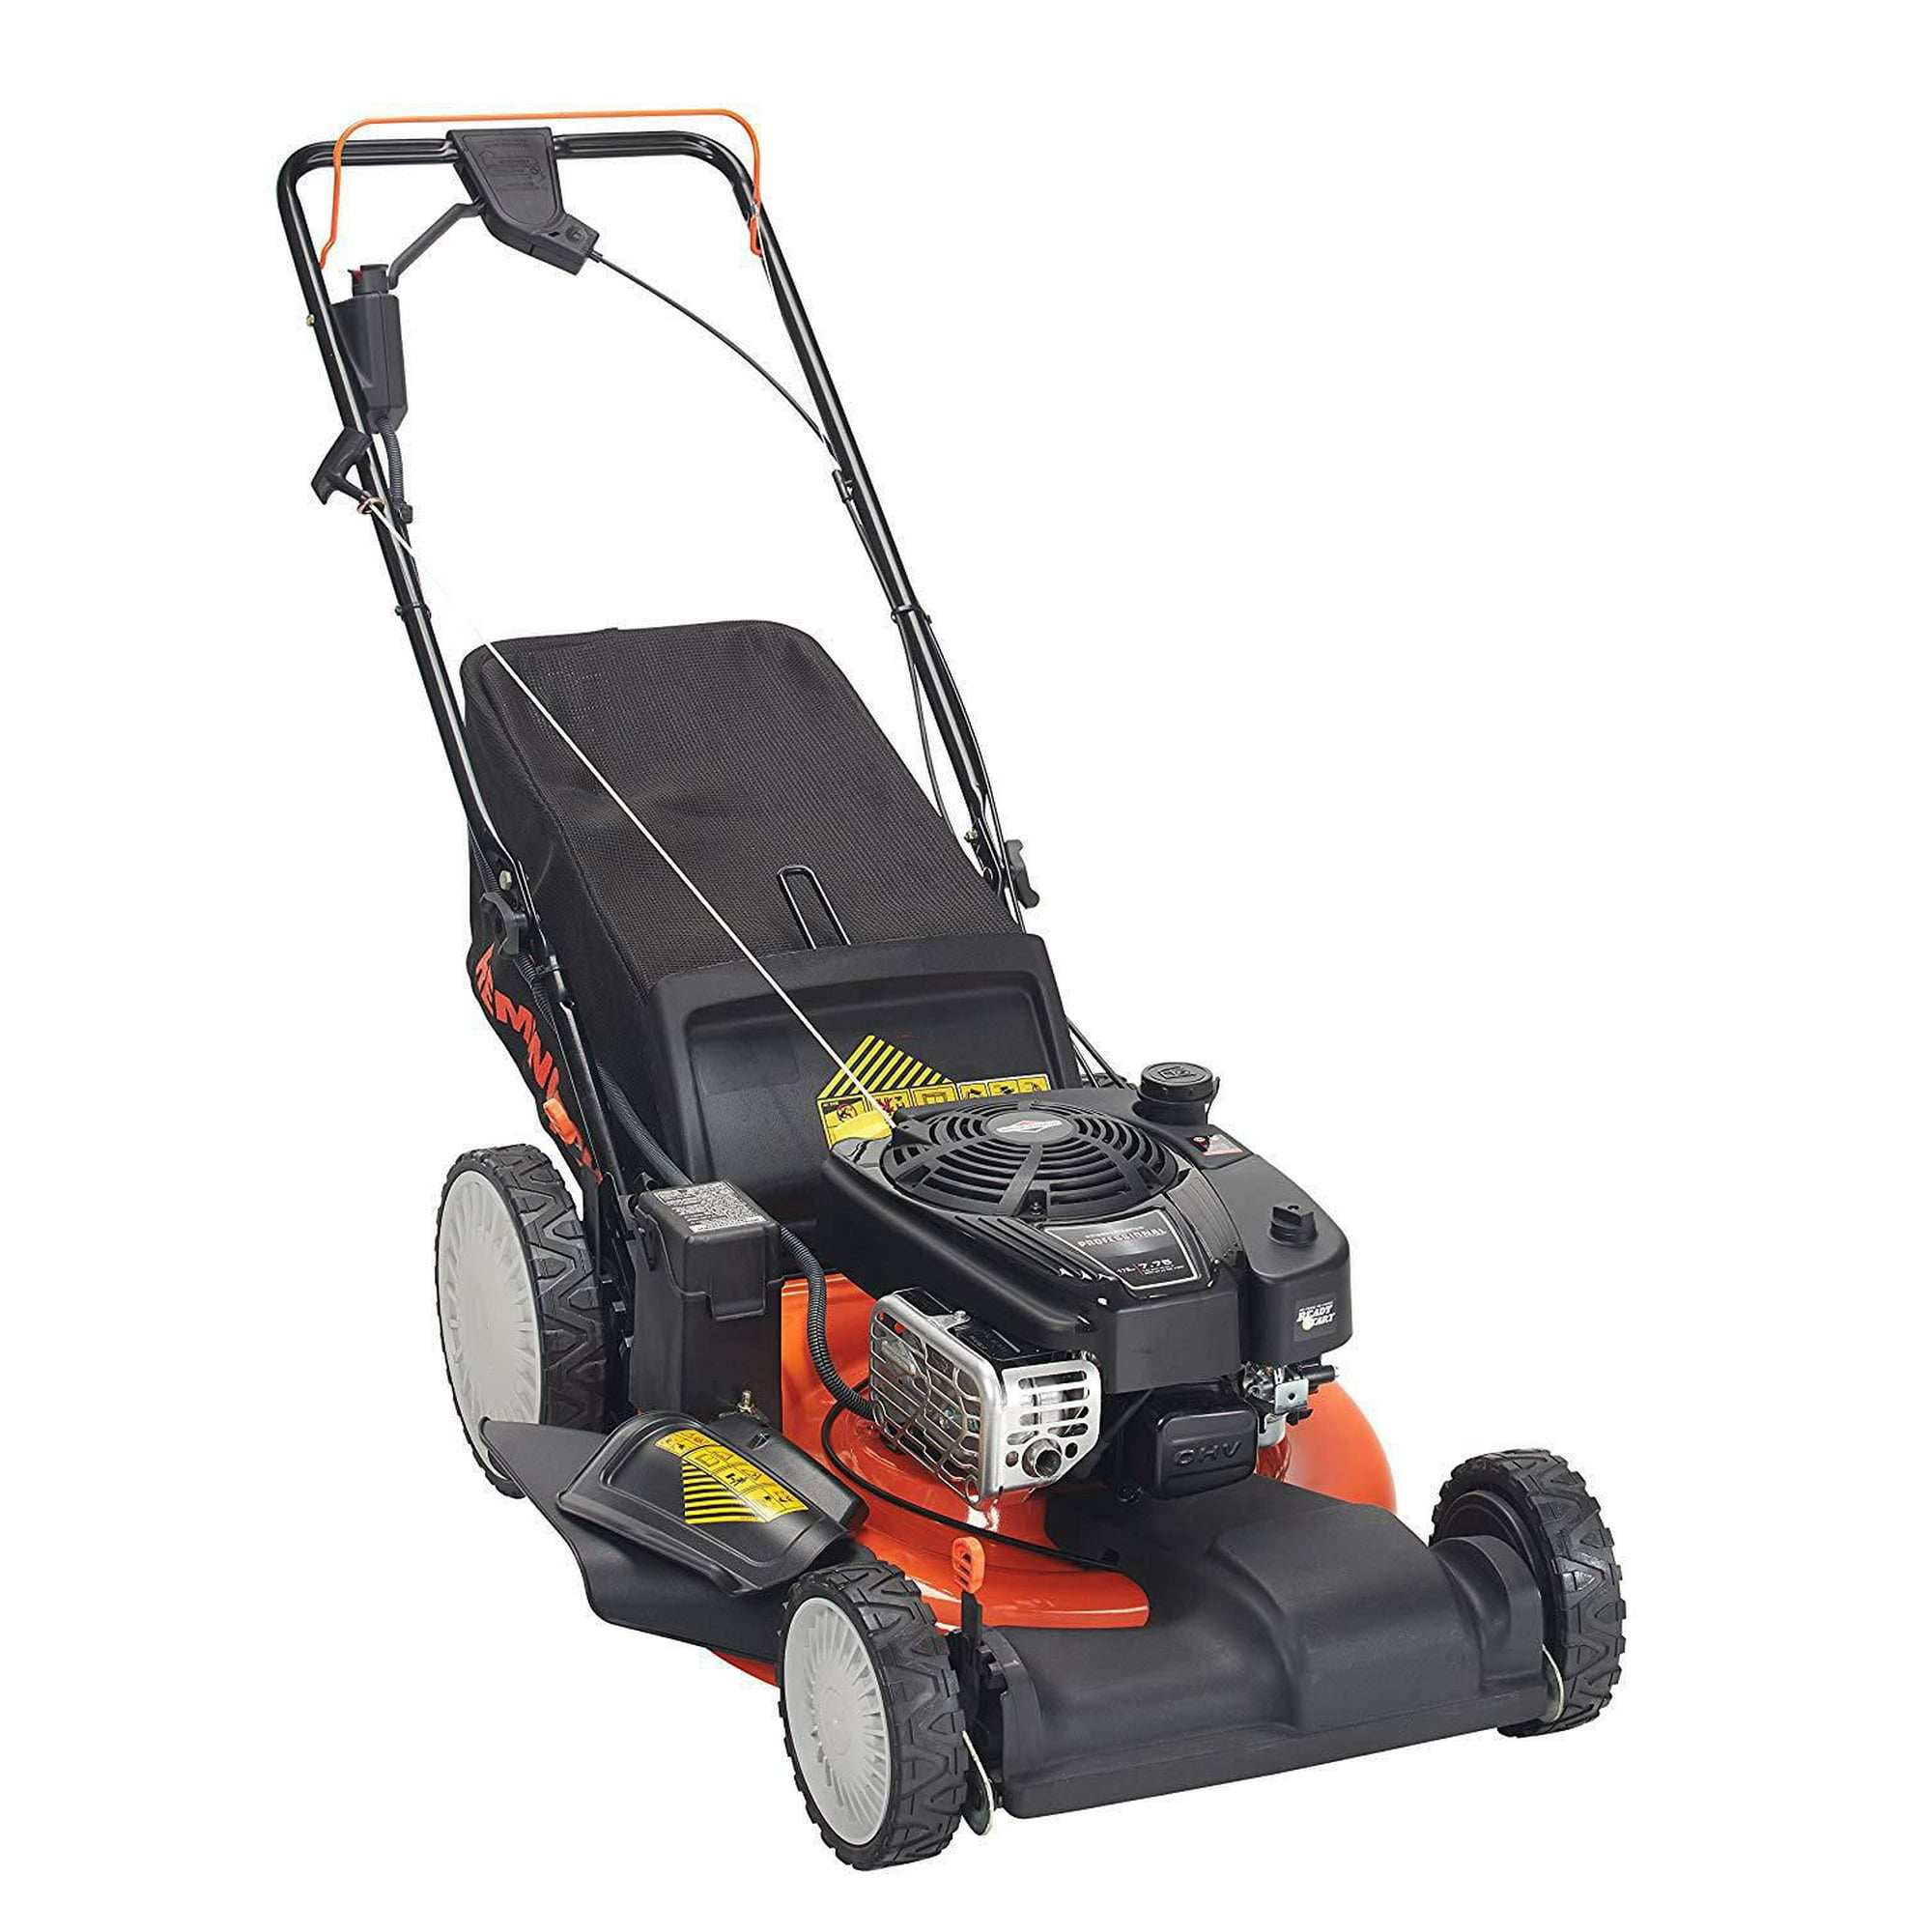 Remington 21” 175cc 3-in-1 Gas Self Propelled Lawn Mower 